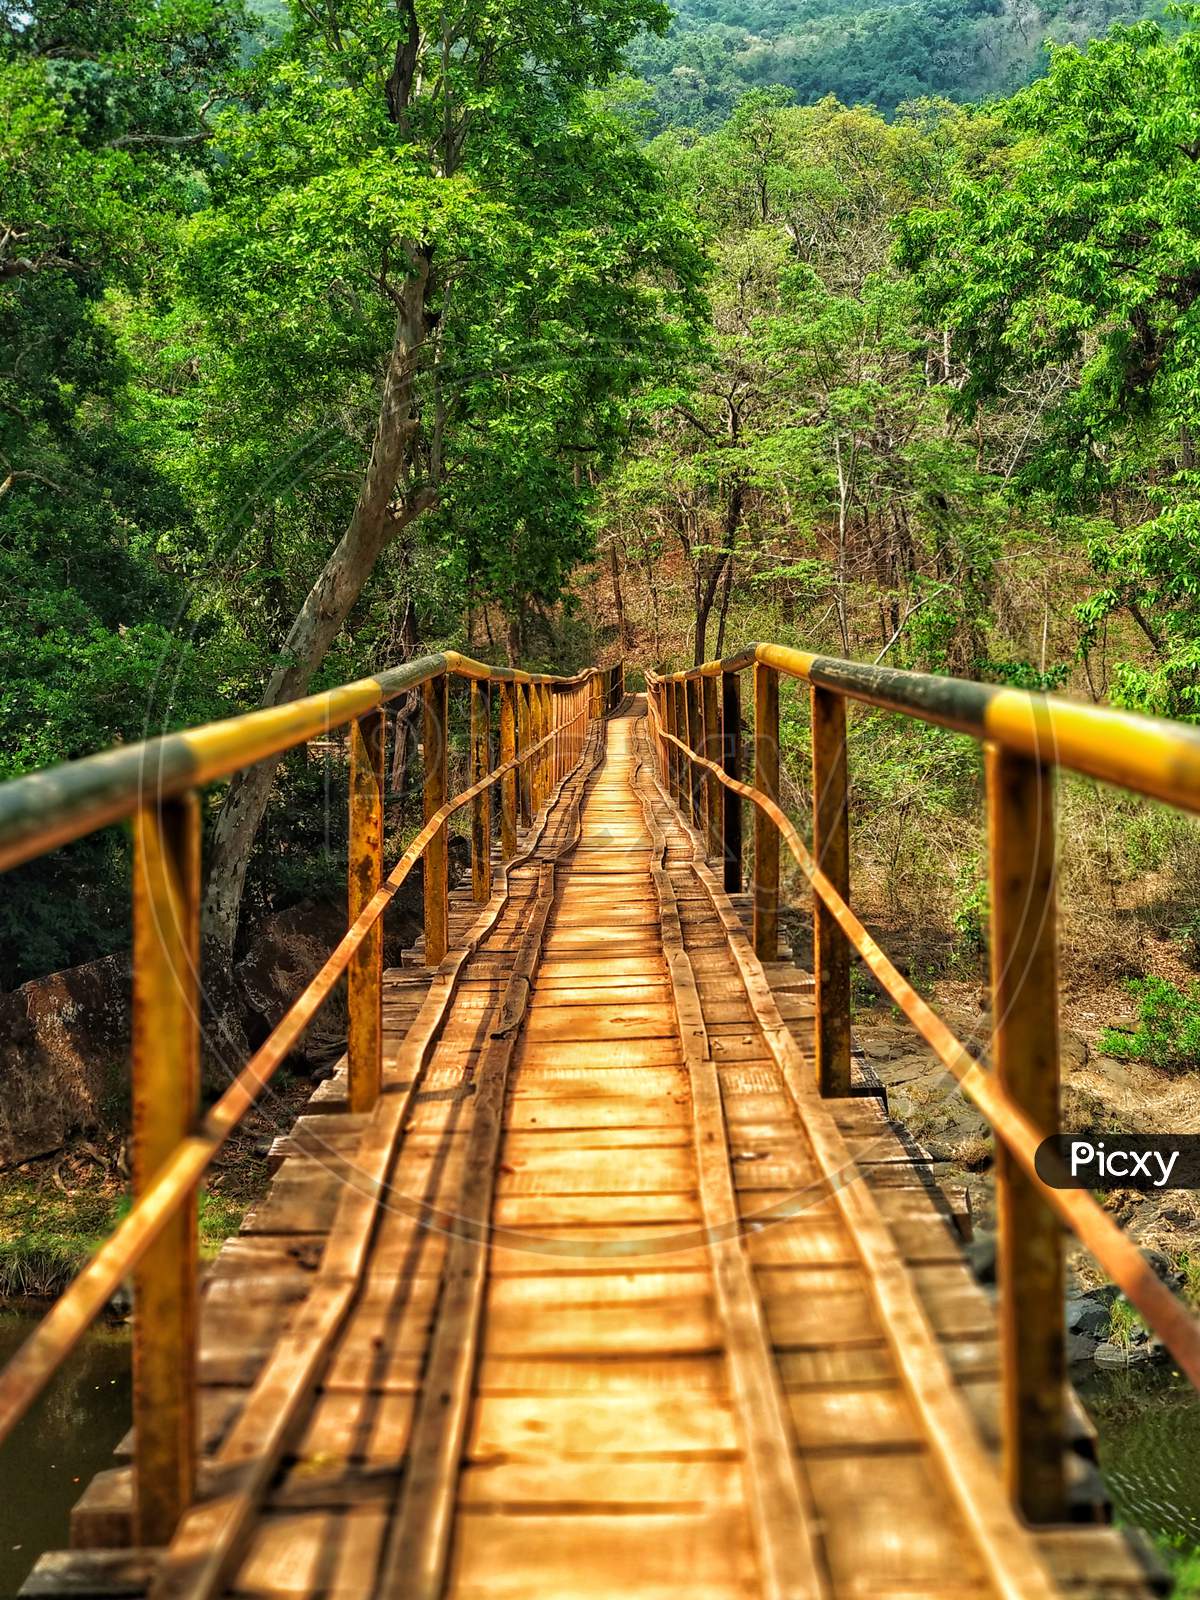 A Narrow Wooden Base Bridge In A Forest Area With Beautiful Large Trees In Western Ghats.